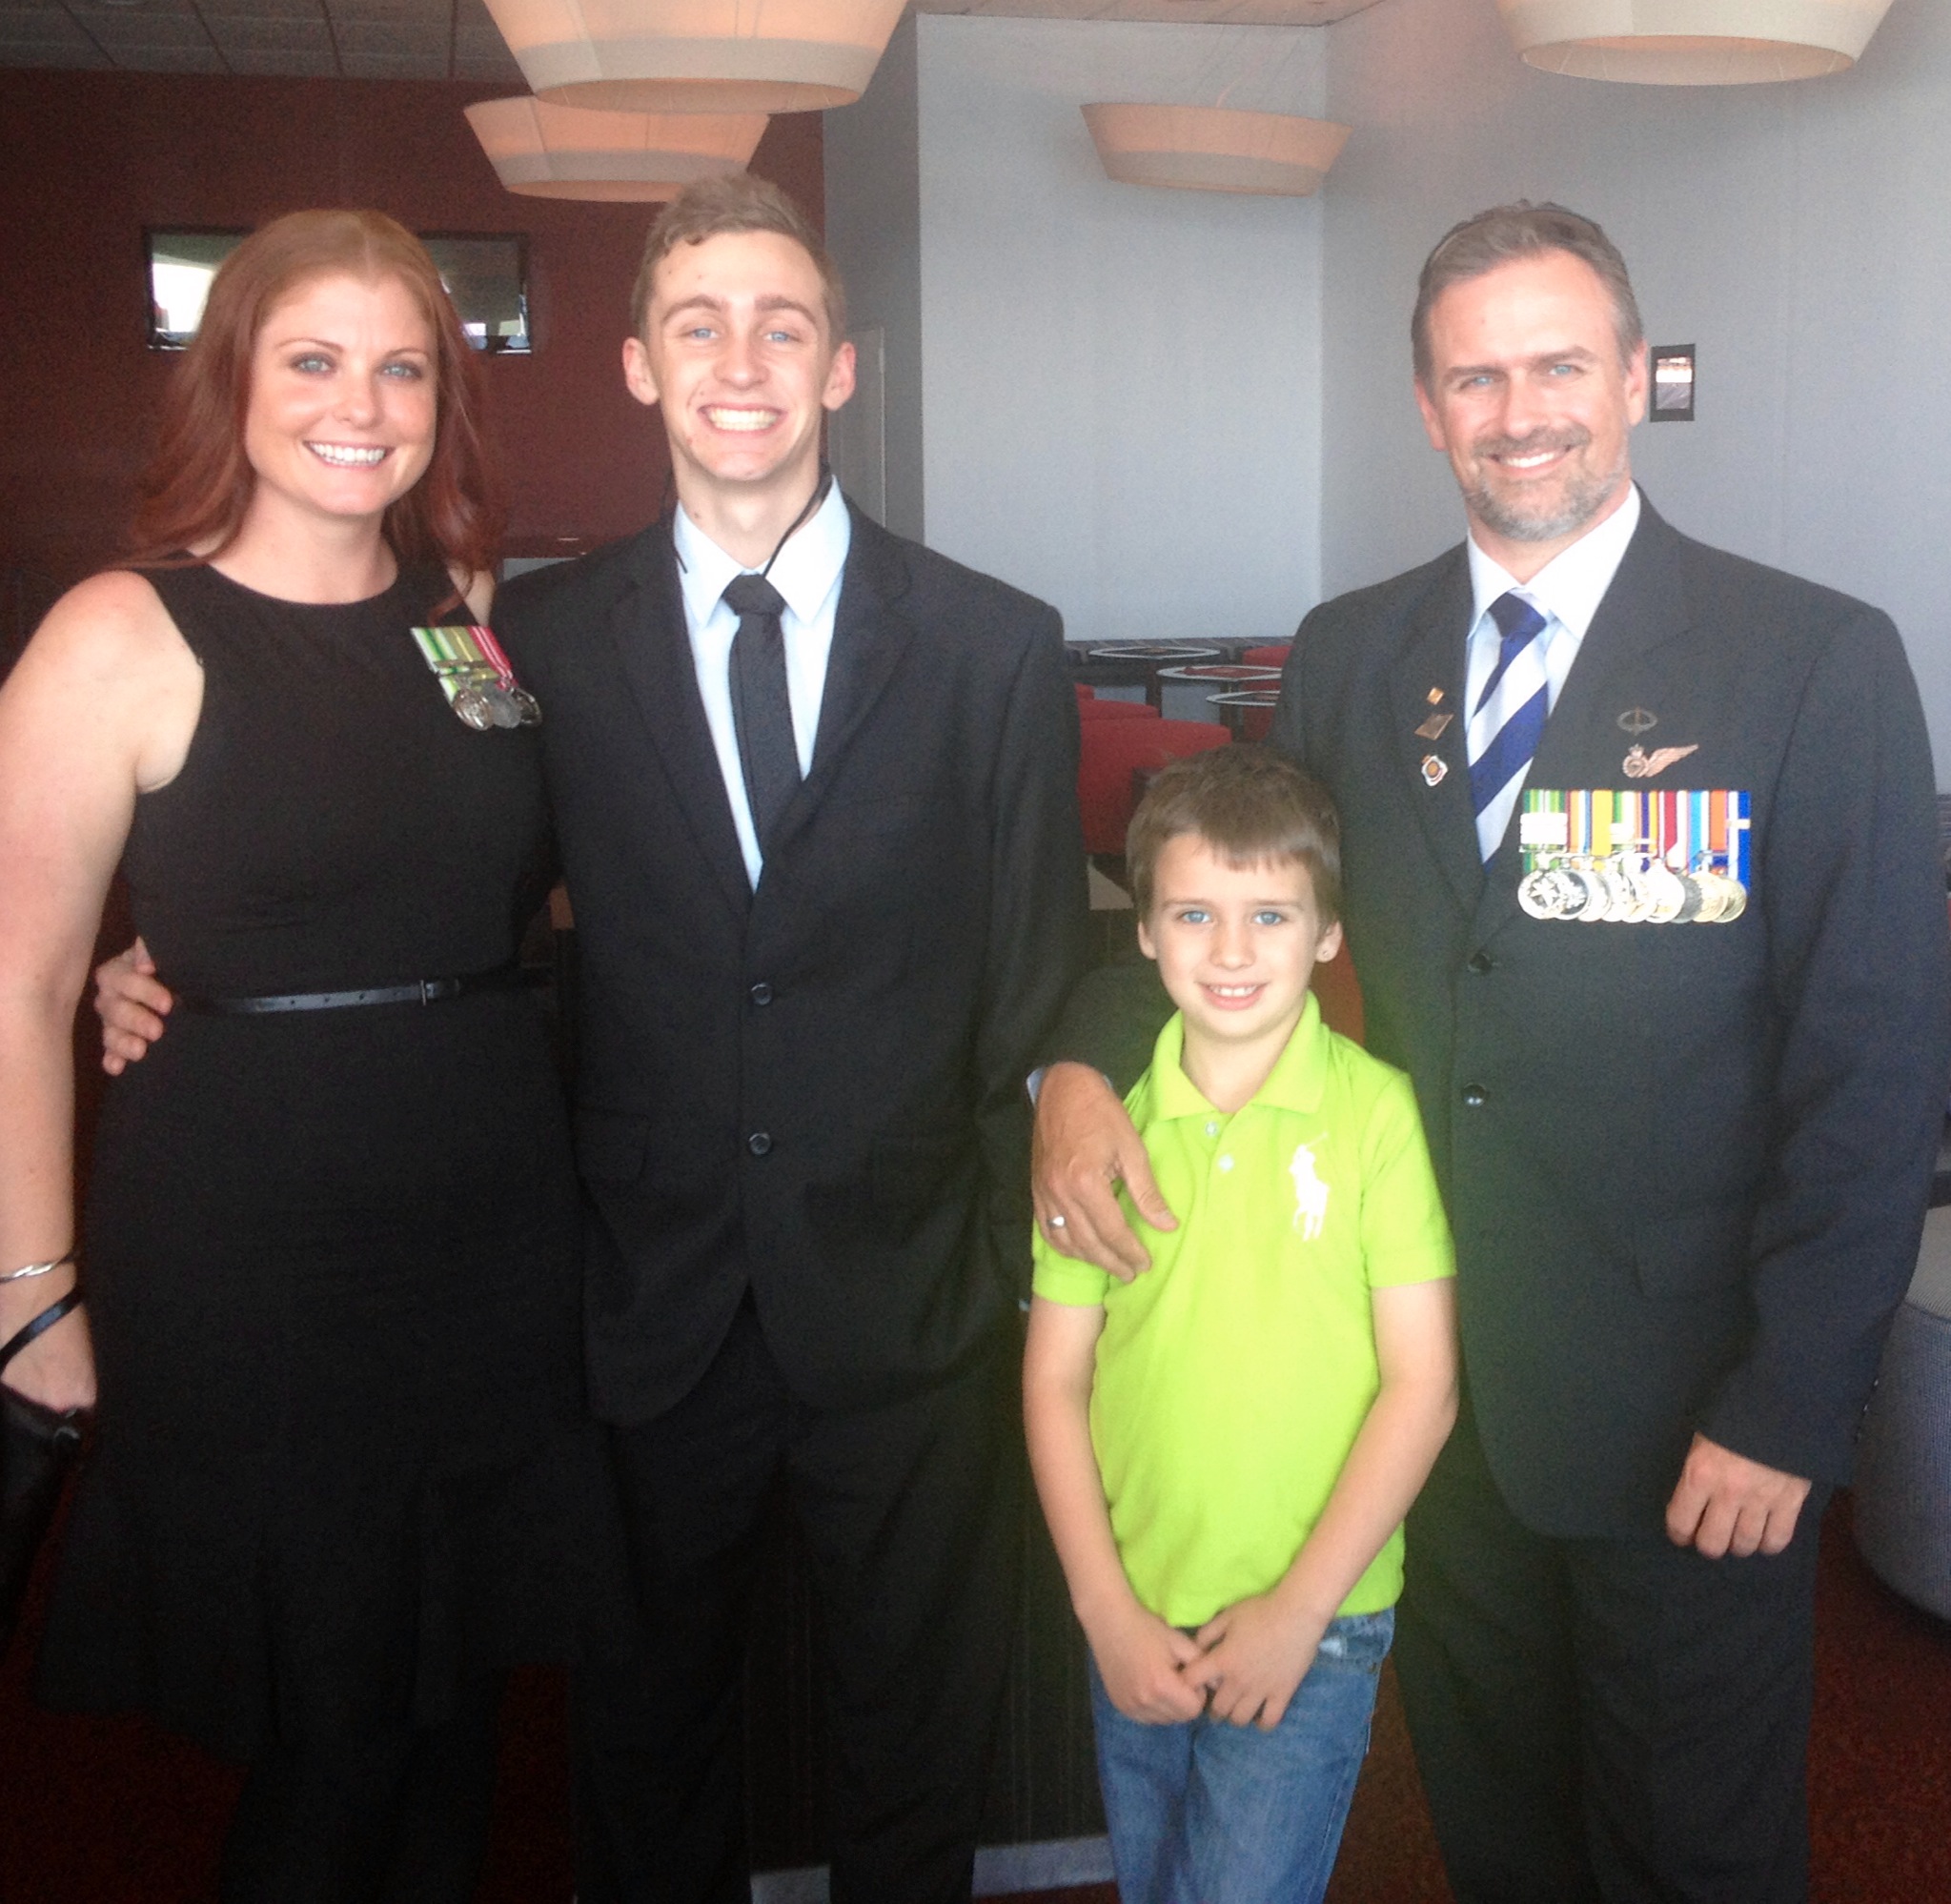 "A dual serving family" in the Australian Military